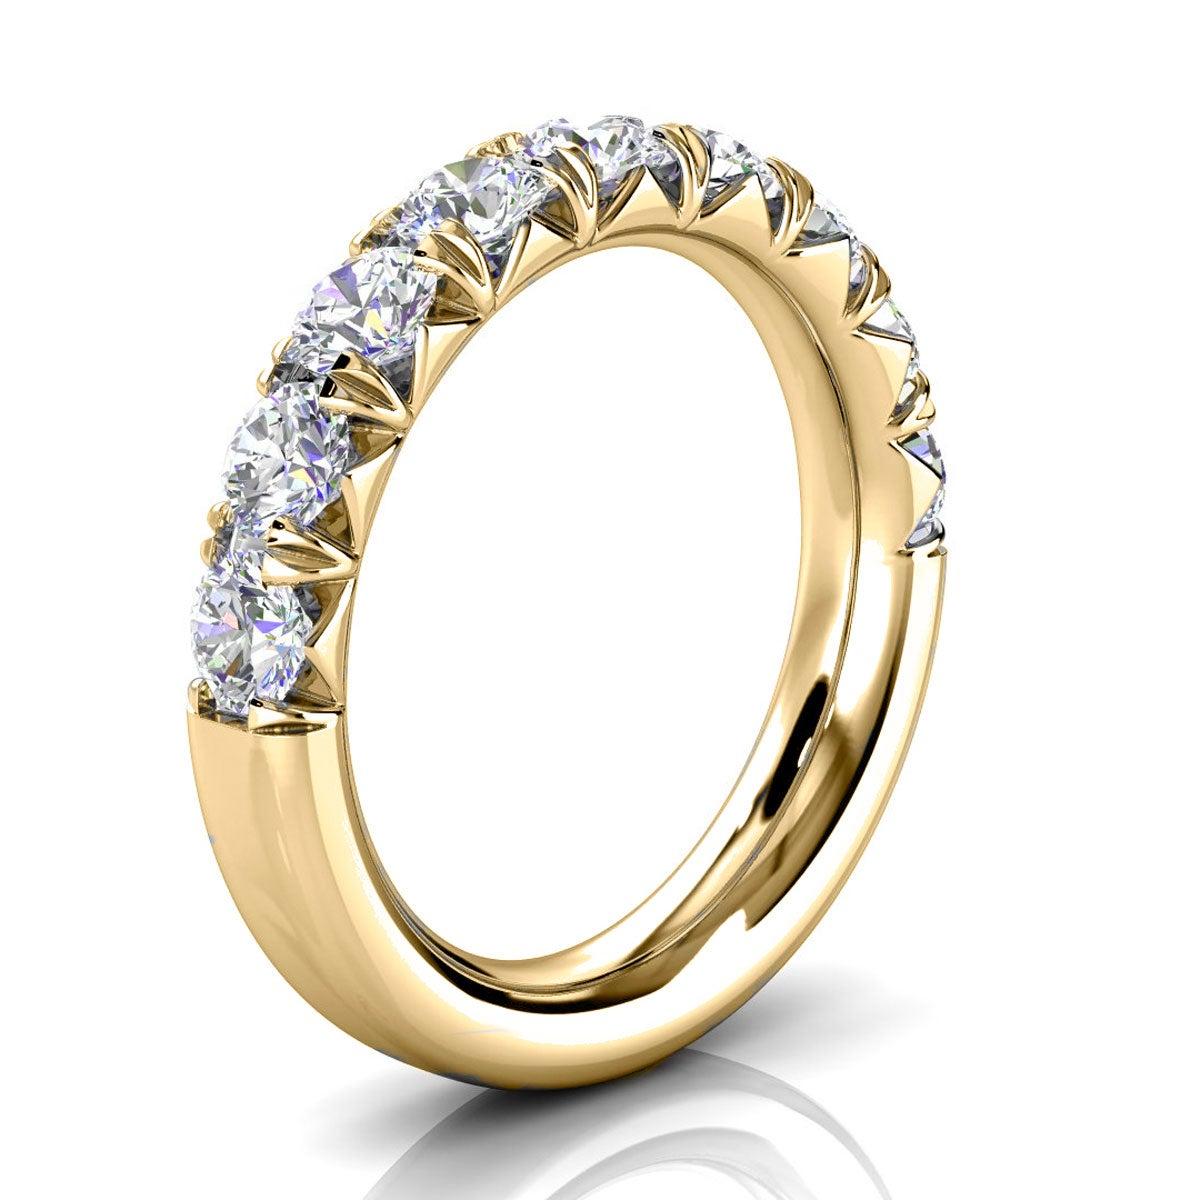 For Sale:  18k Yellow Gold Voyage French Pave Diamond Ring '1 1/2 Ct. Tw' 2